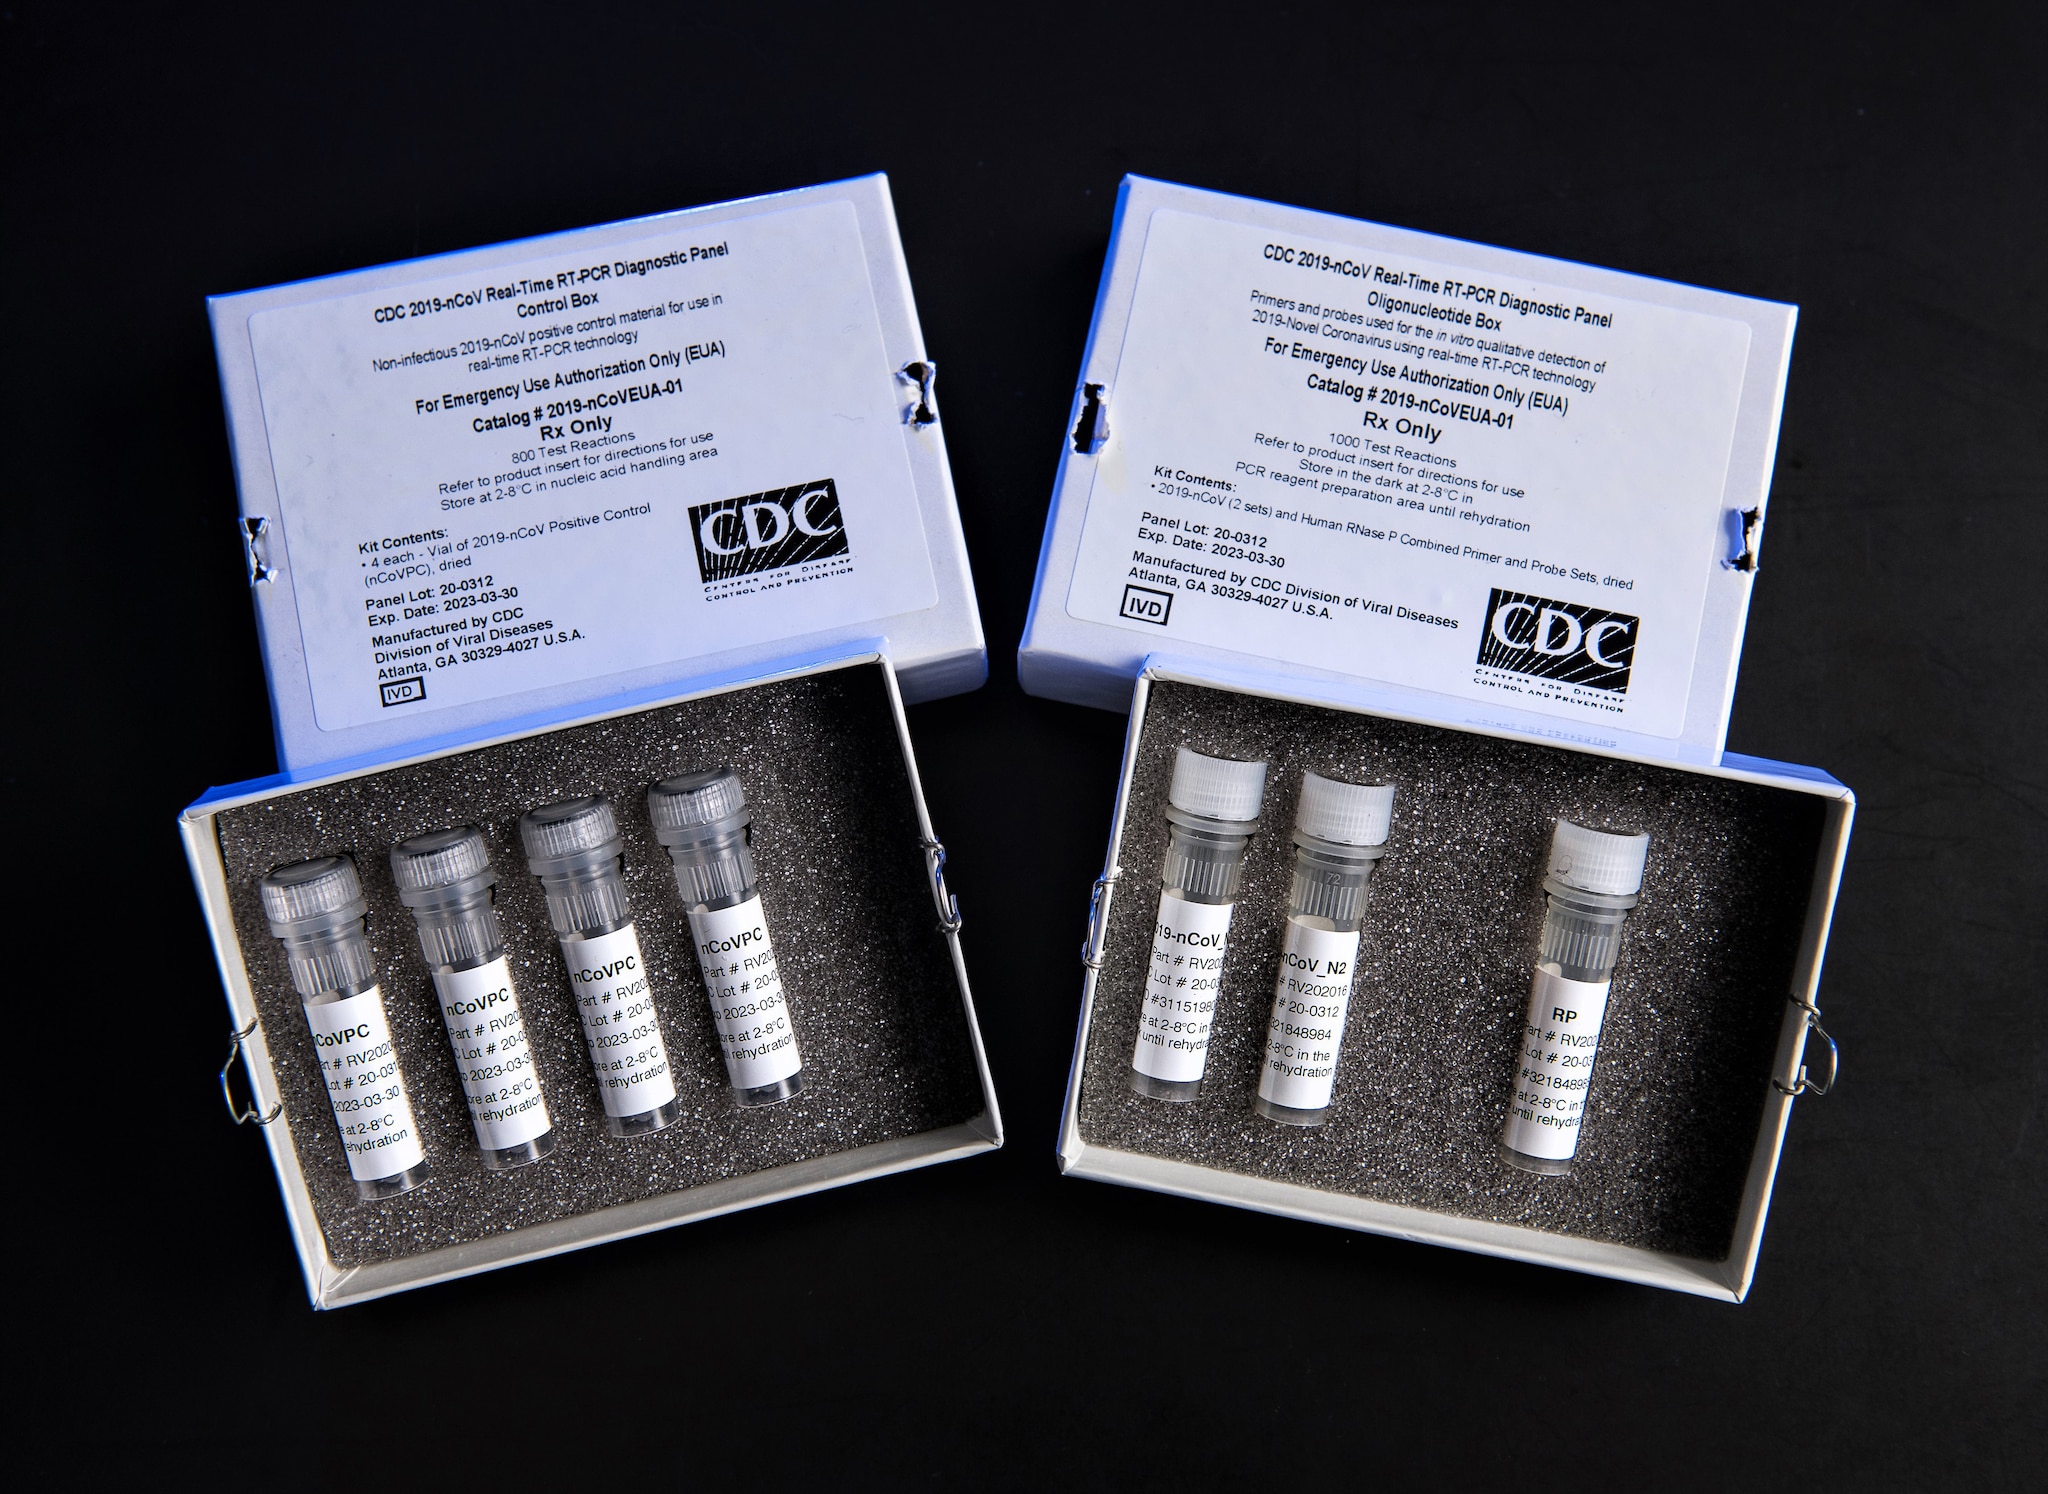 This is a picture of CDC’s laboratory test kit for the severe acute respiratory syndrome coronavirus 2 [SARS-CoV-2). CDC is shipping the test kits to laboratories CDC has designated as qualified, including U.S. state and local public health laboratories, Department of Defense (DOD) laboratories and select international laboratories. The test kits are bolstering global laboratory capacity for detecting SARS-CoV-2.